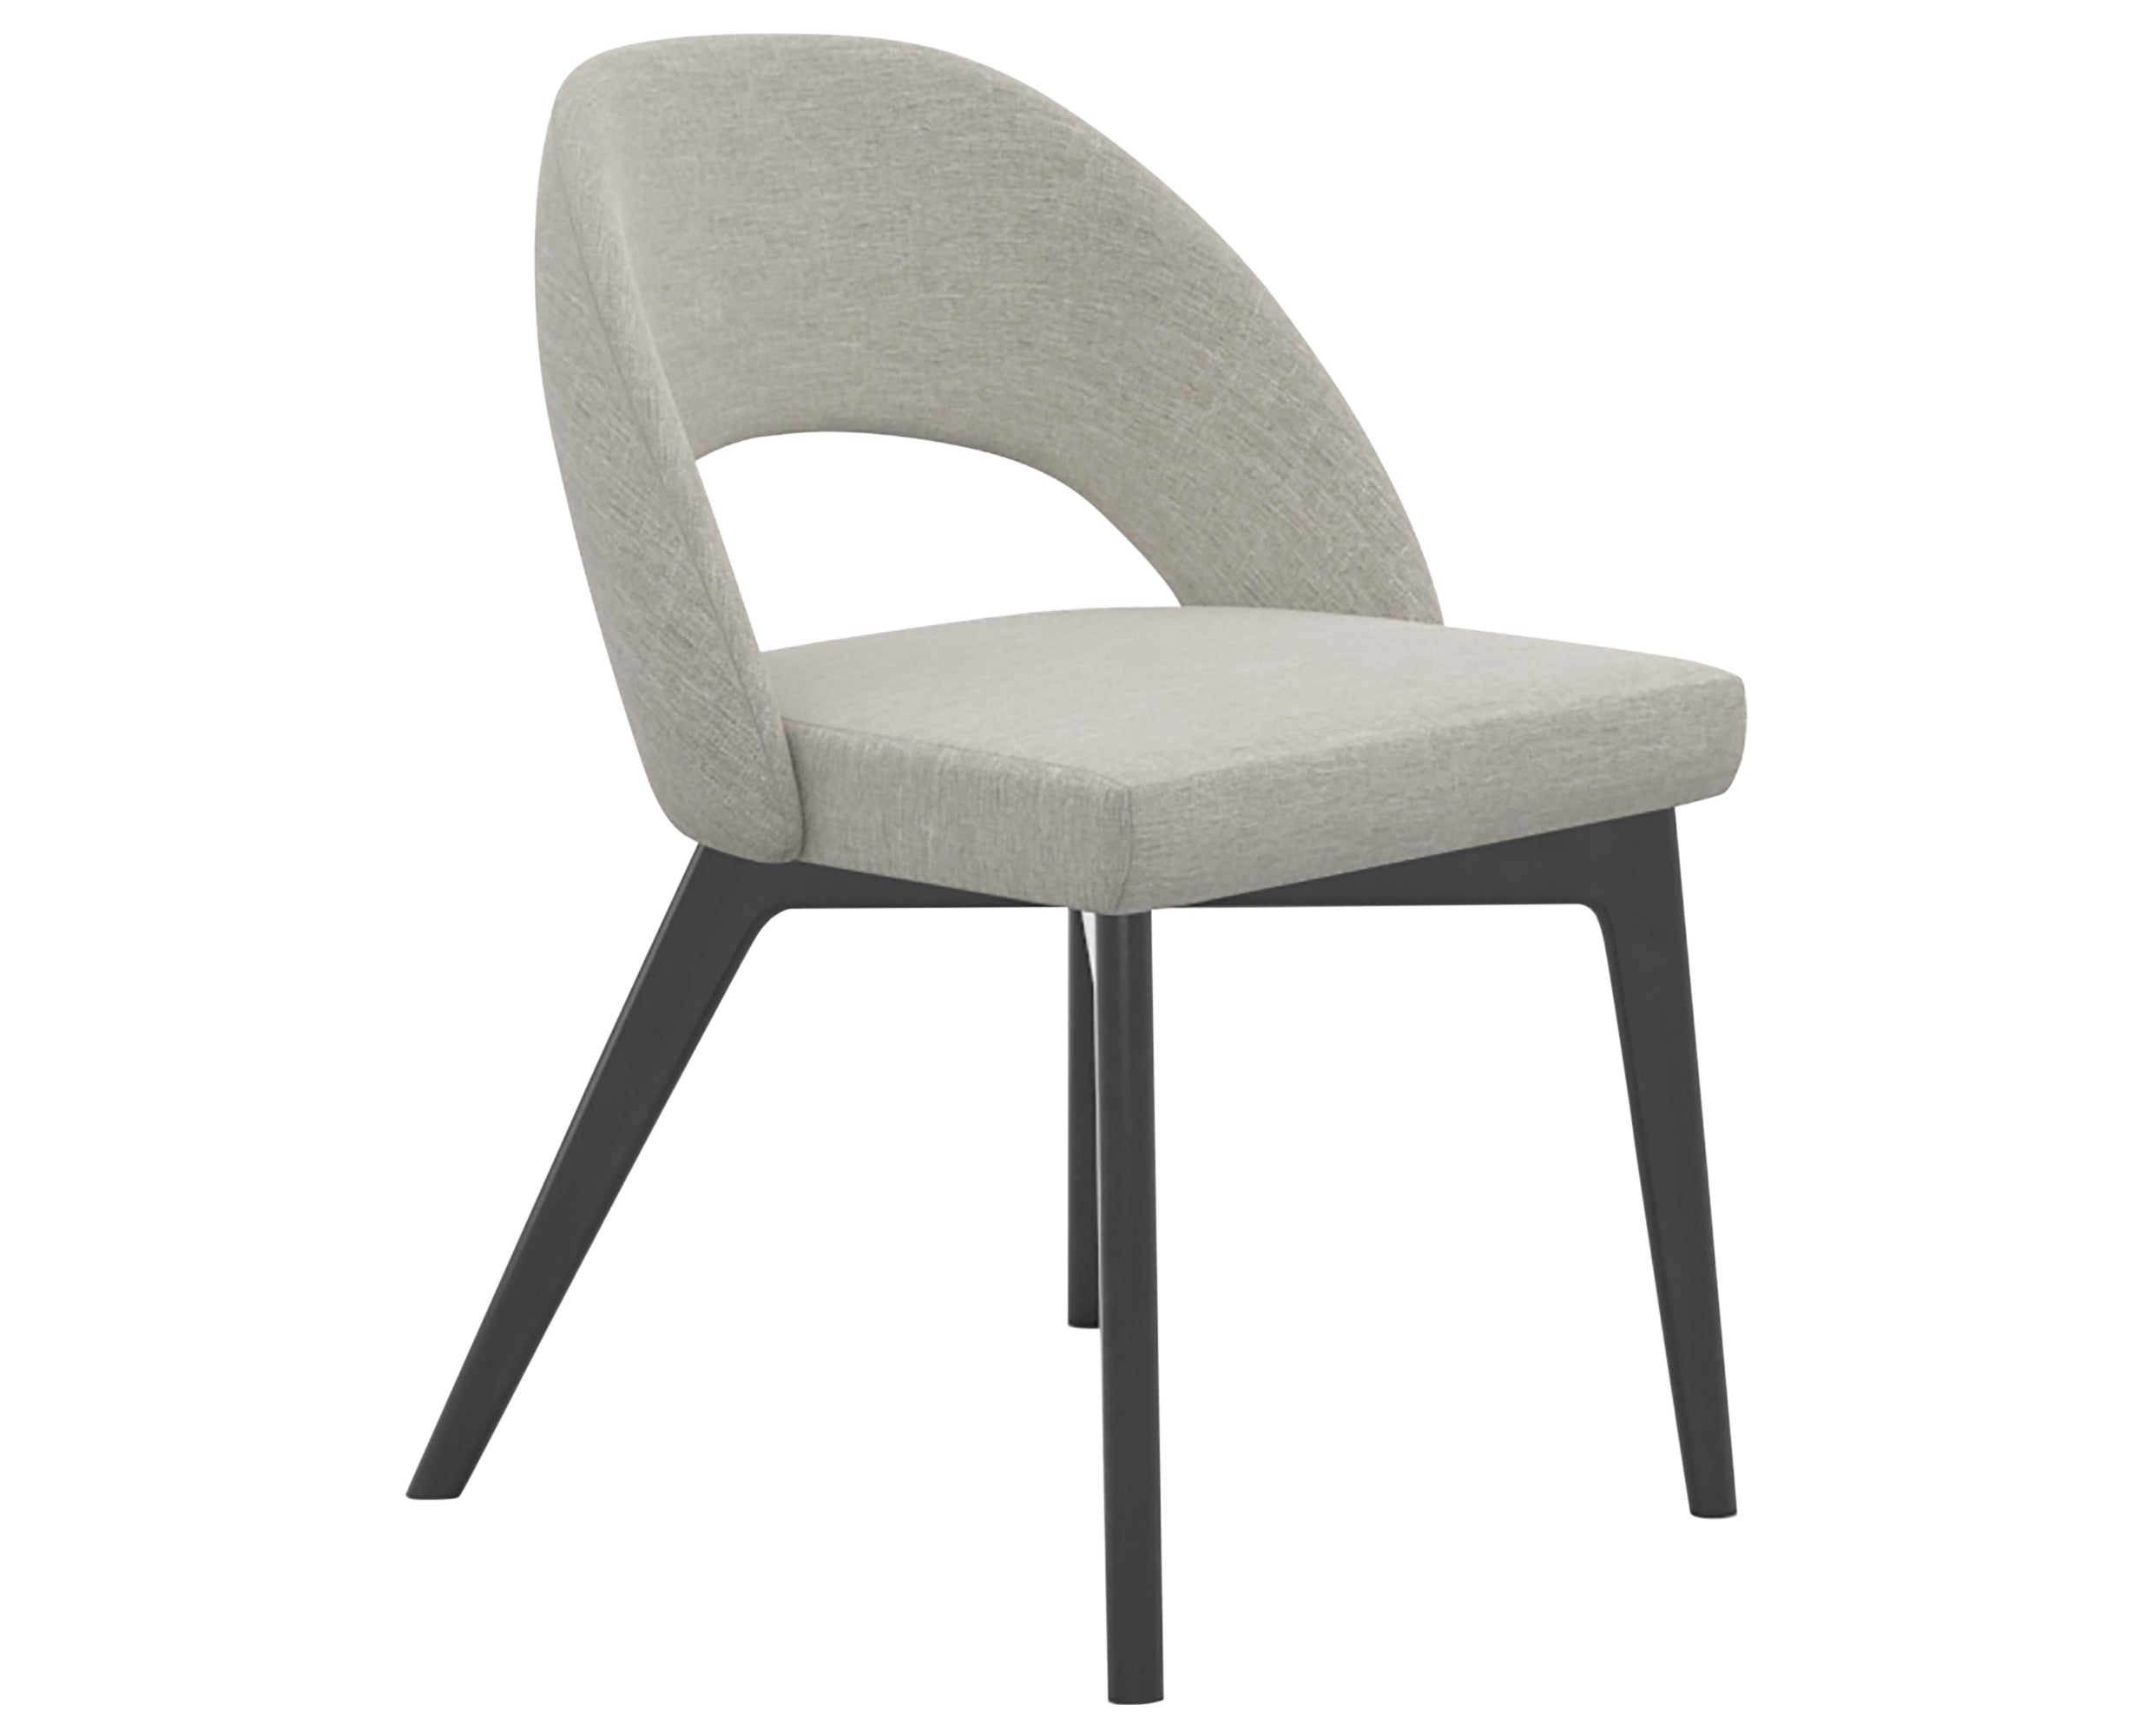 Peppercorn Washed &amp; Fabric TB | Canadel Downtown Dining Chair 5140 | Valley Ridge Furniture